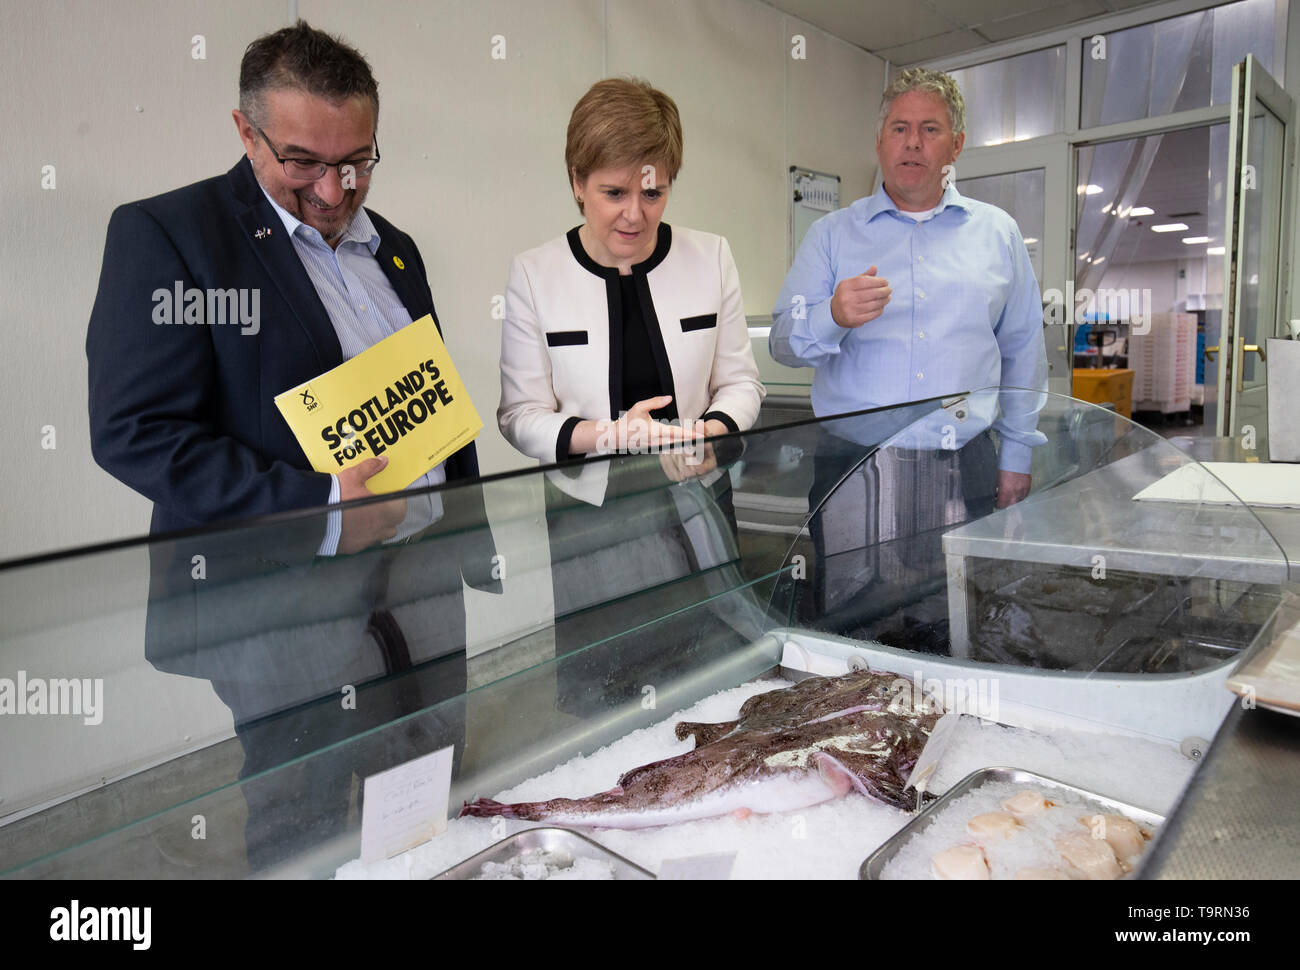 First Minister Nicola Sturgeon with SNP European election candidate Christian Allard (left) and owner Andrew Charles (right) during a visit to J Charles Ltd seafood processing plant in Aberdeen. Christian Allard worked at J Charles Ltd for 25 years exporting seafood to the continent, before he entered politics. Stock Photo